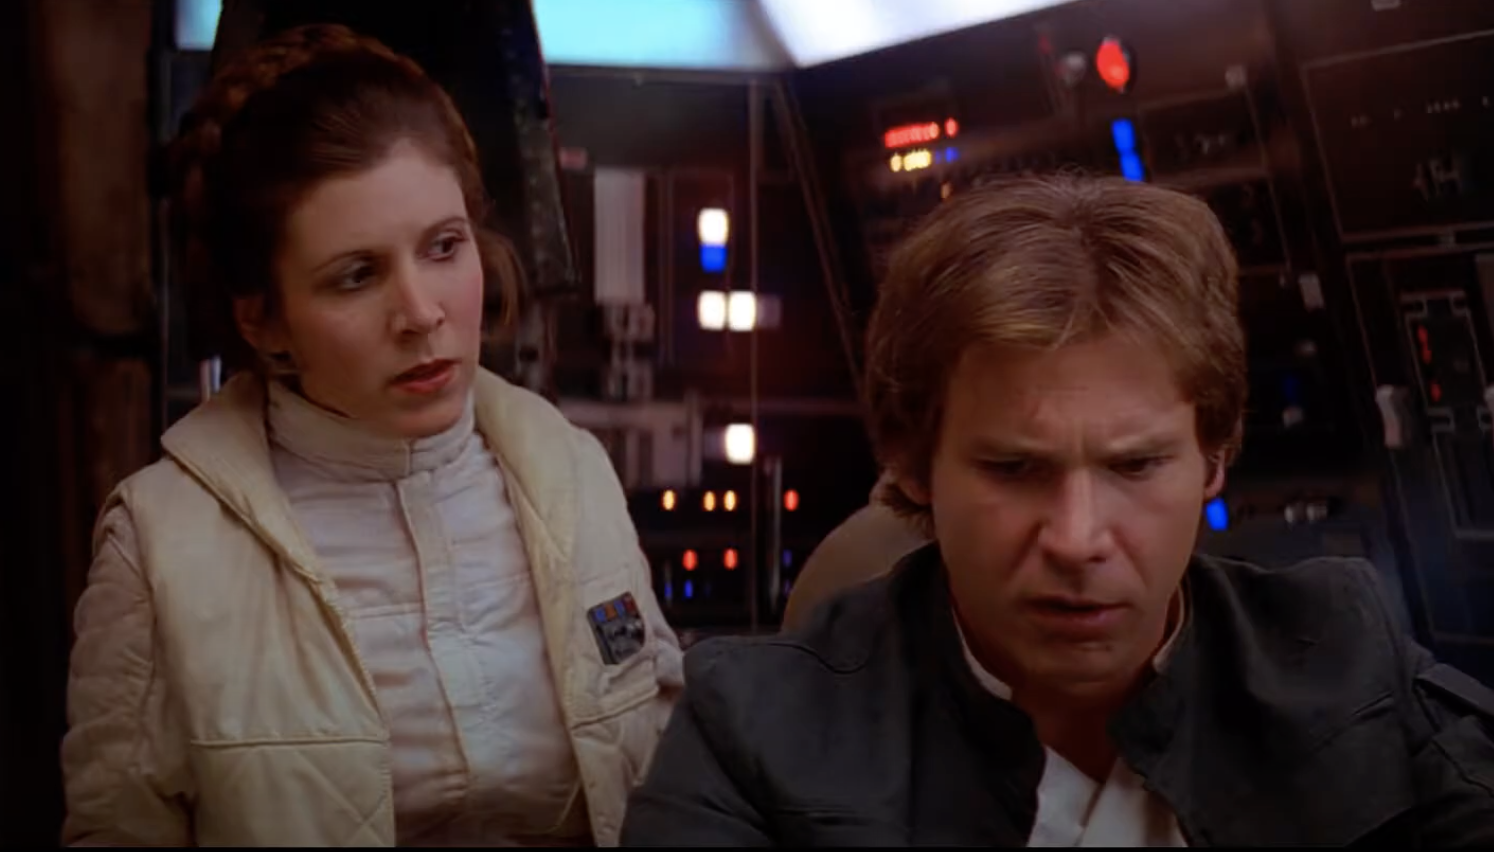 Fisher as Princess Leia looks at Ford as Solo, who looks confused